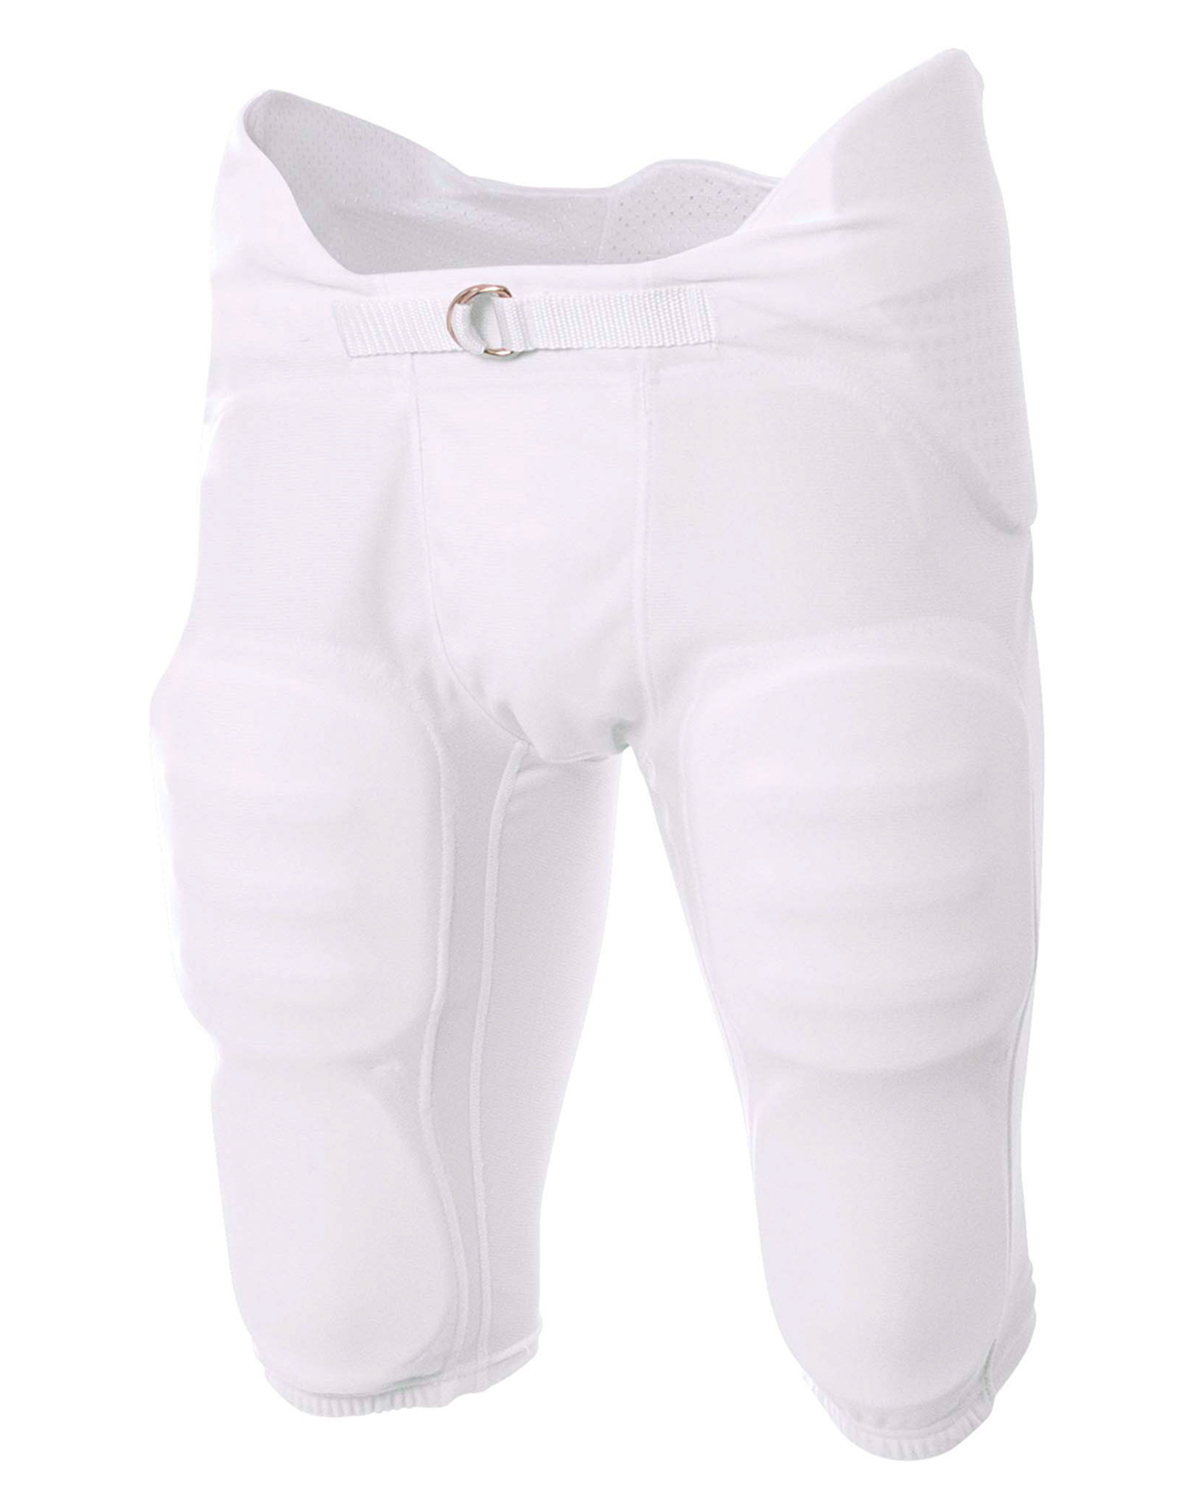 A4 Drop Ship NB6180 - Youth Flyless Integrated Football Pants